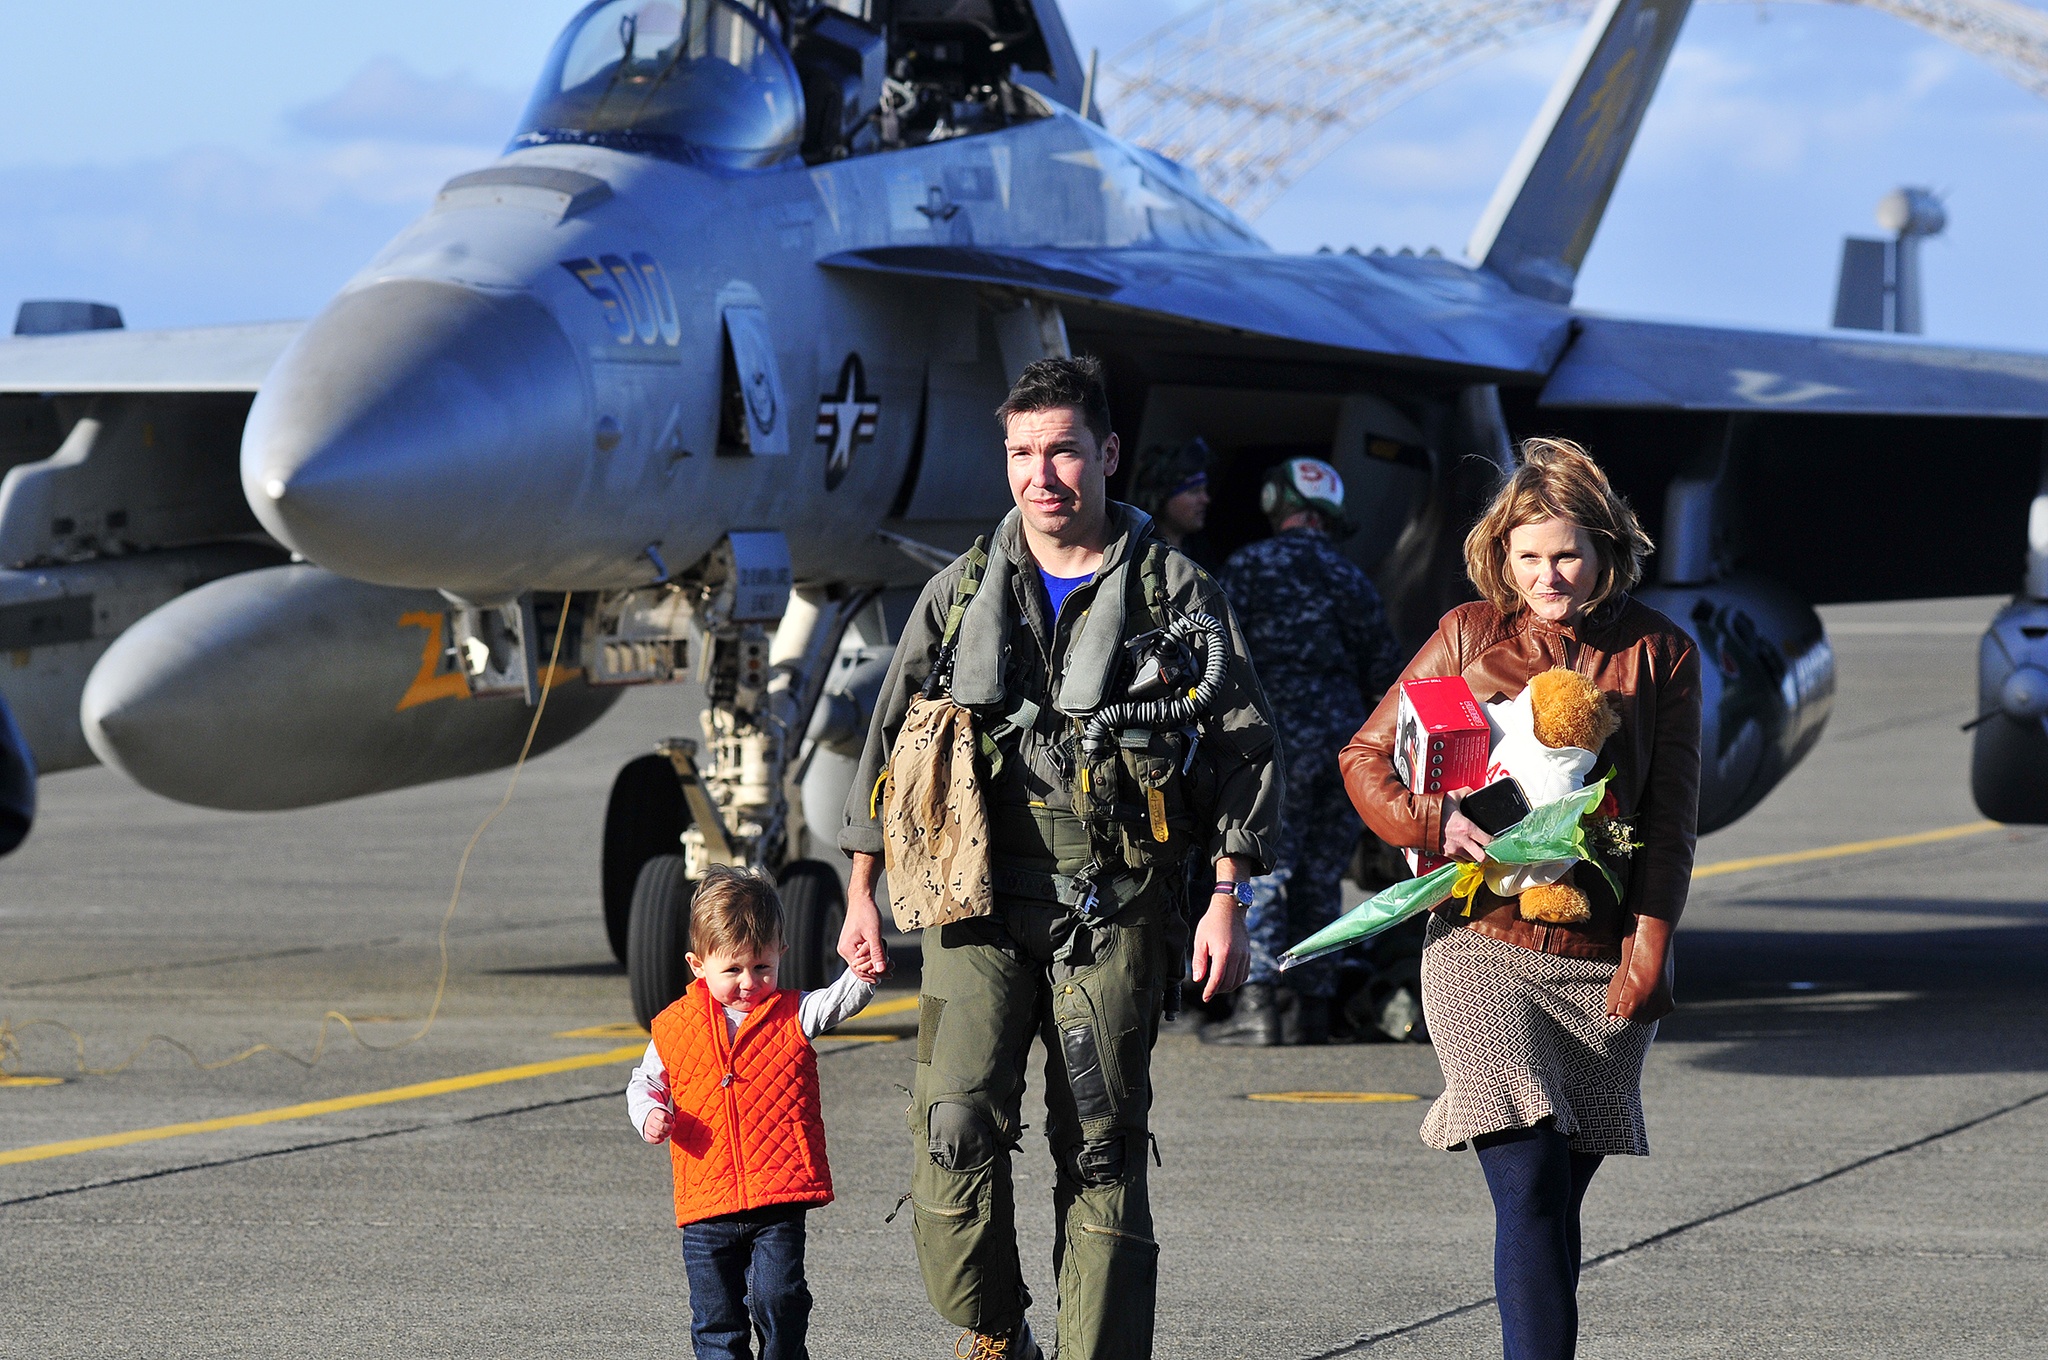 Lt. Cmdr. Kevin Jones assigned to Tactical Electronic Warfare Squadron 130 is greeted by his family upon returning home to Naval Air Station Whidbey Island, Wash. Dec. 30, 2016. Photo by Michael Watkins/Whidbey News-Times